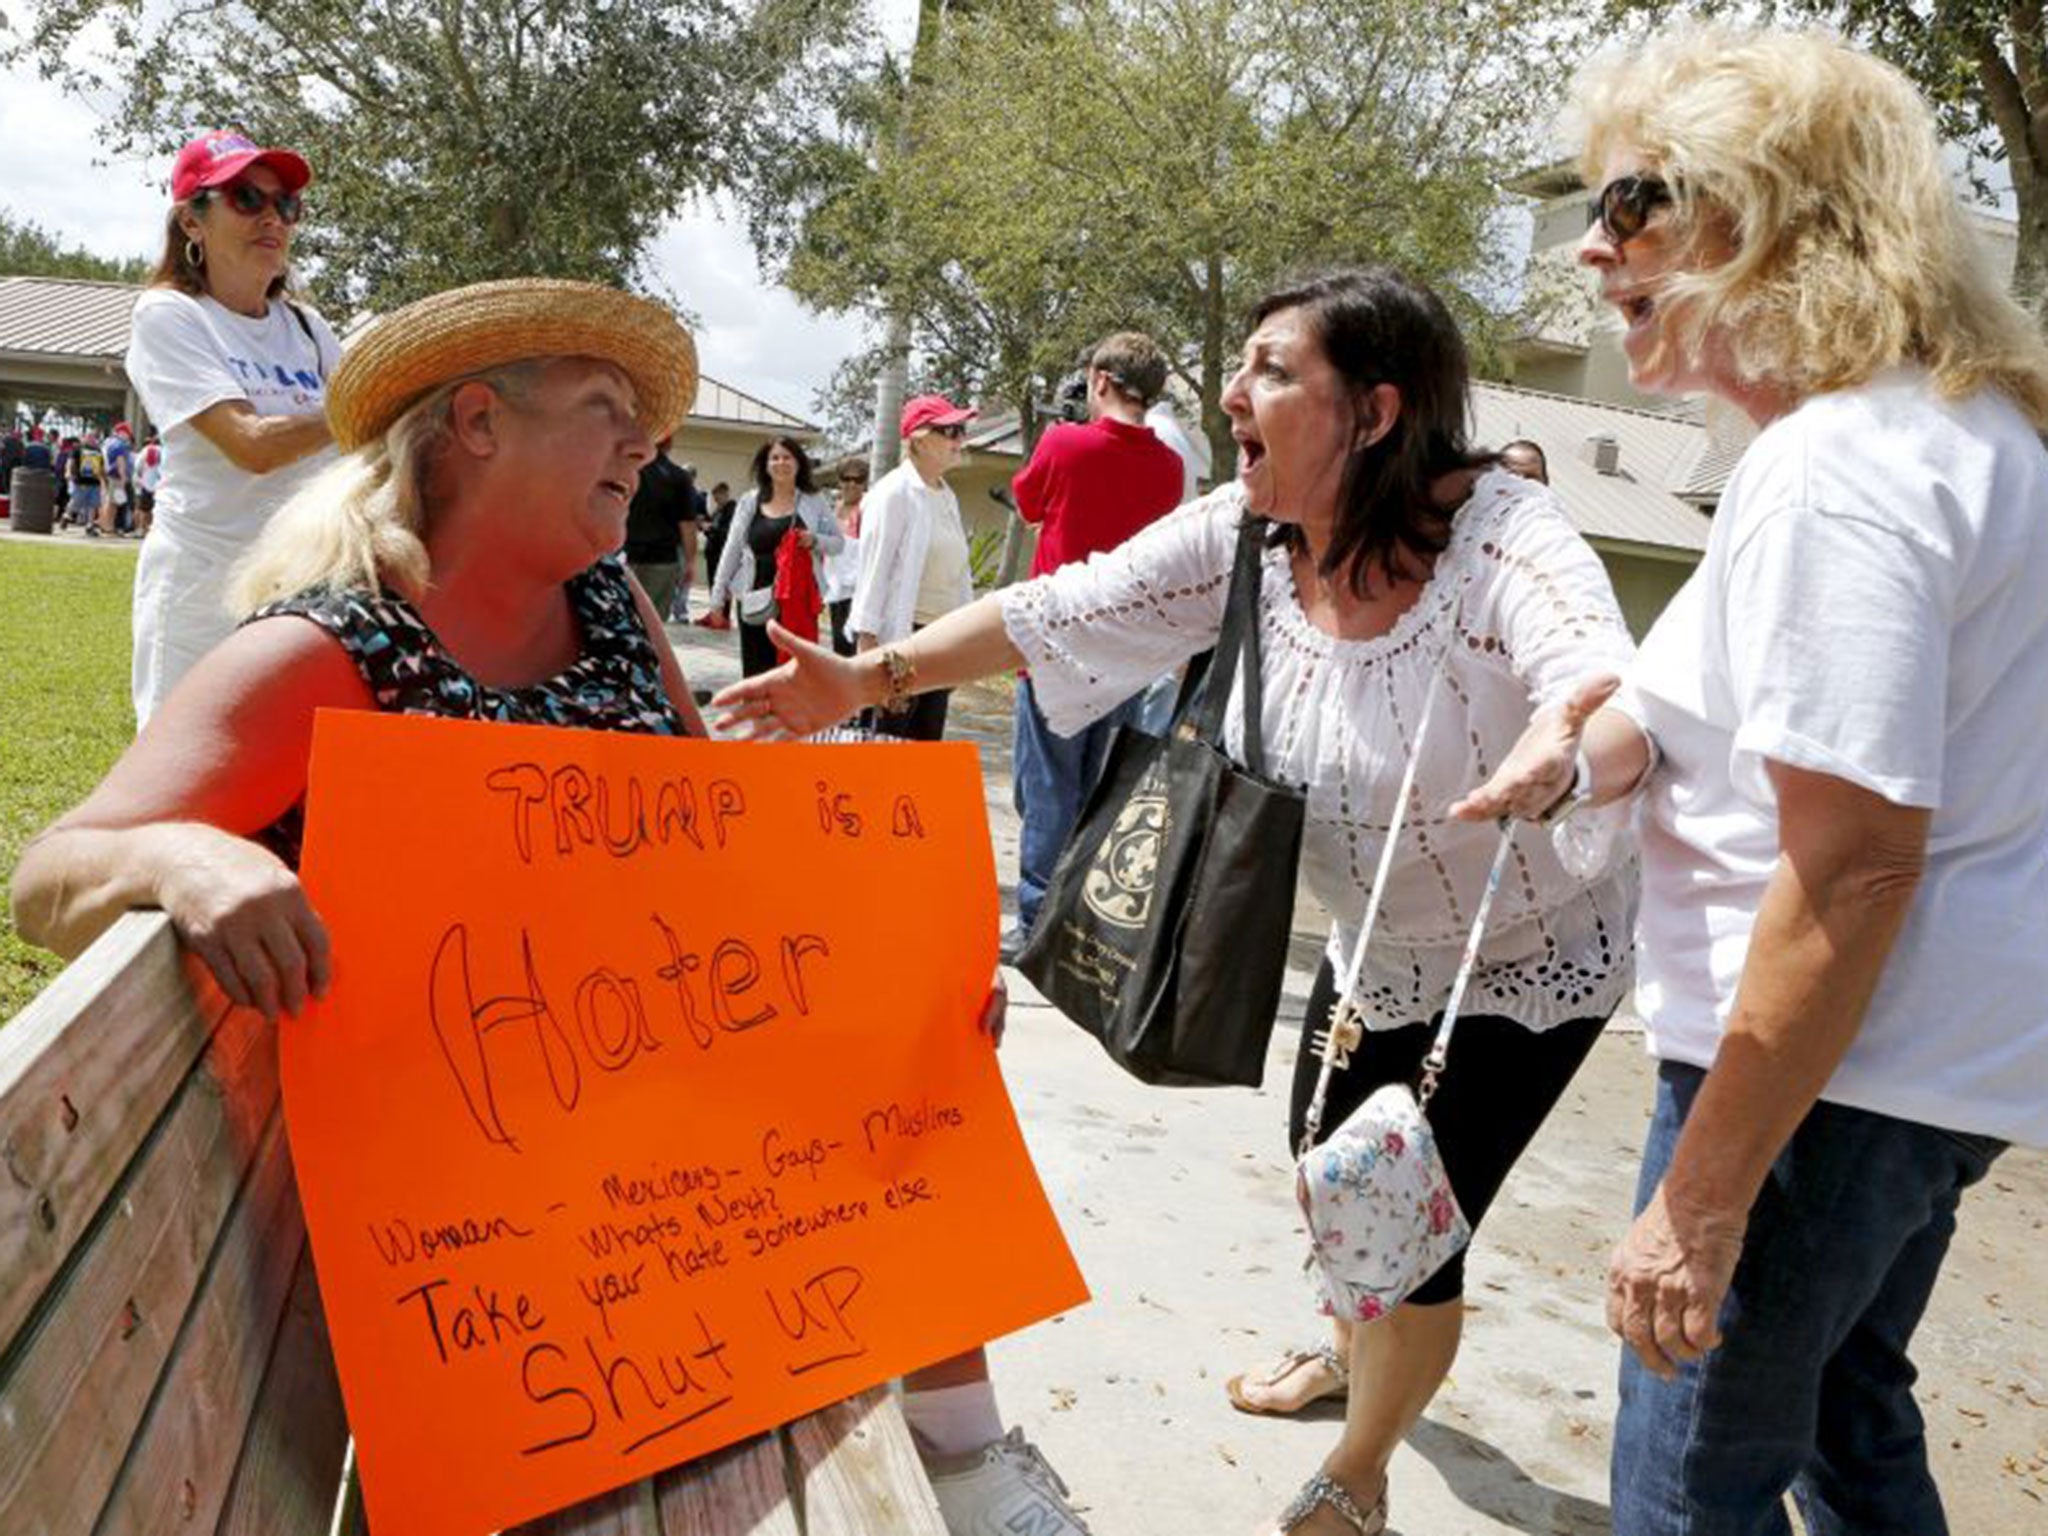 Susan Wantz, seated, argues with Trump supporter Patricia Lobracco before a rally in Florida